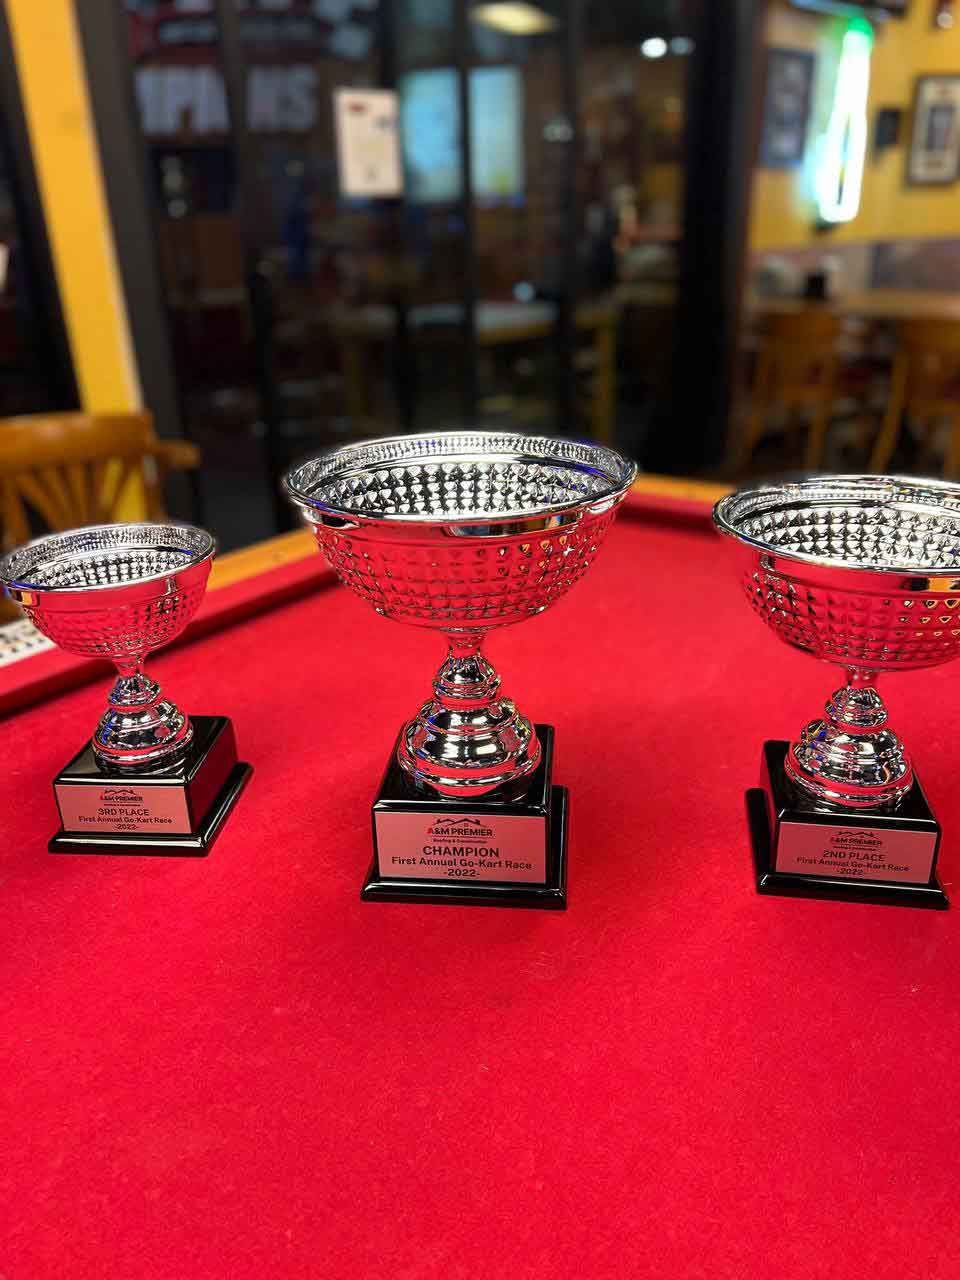 First Annual Go-Kart Race Trophies